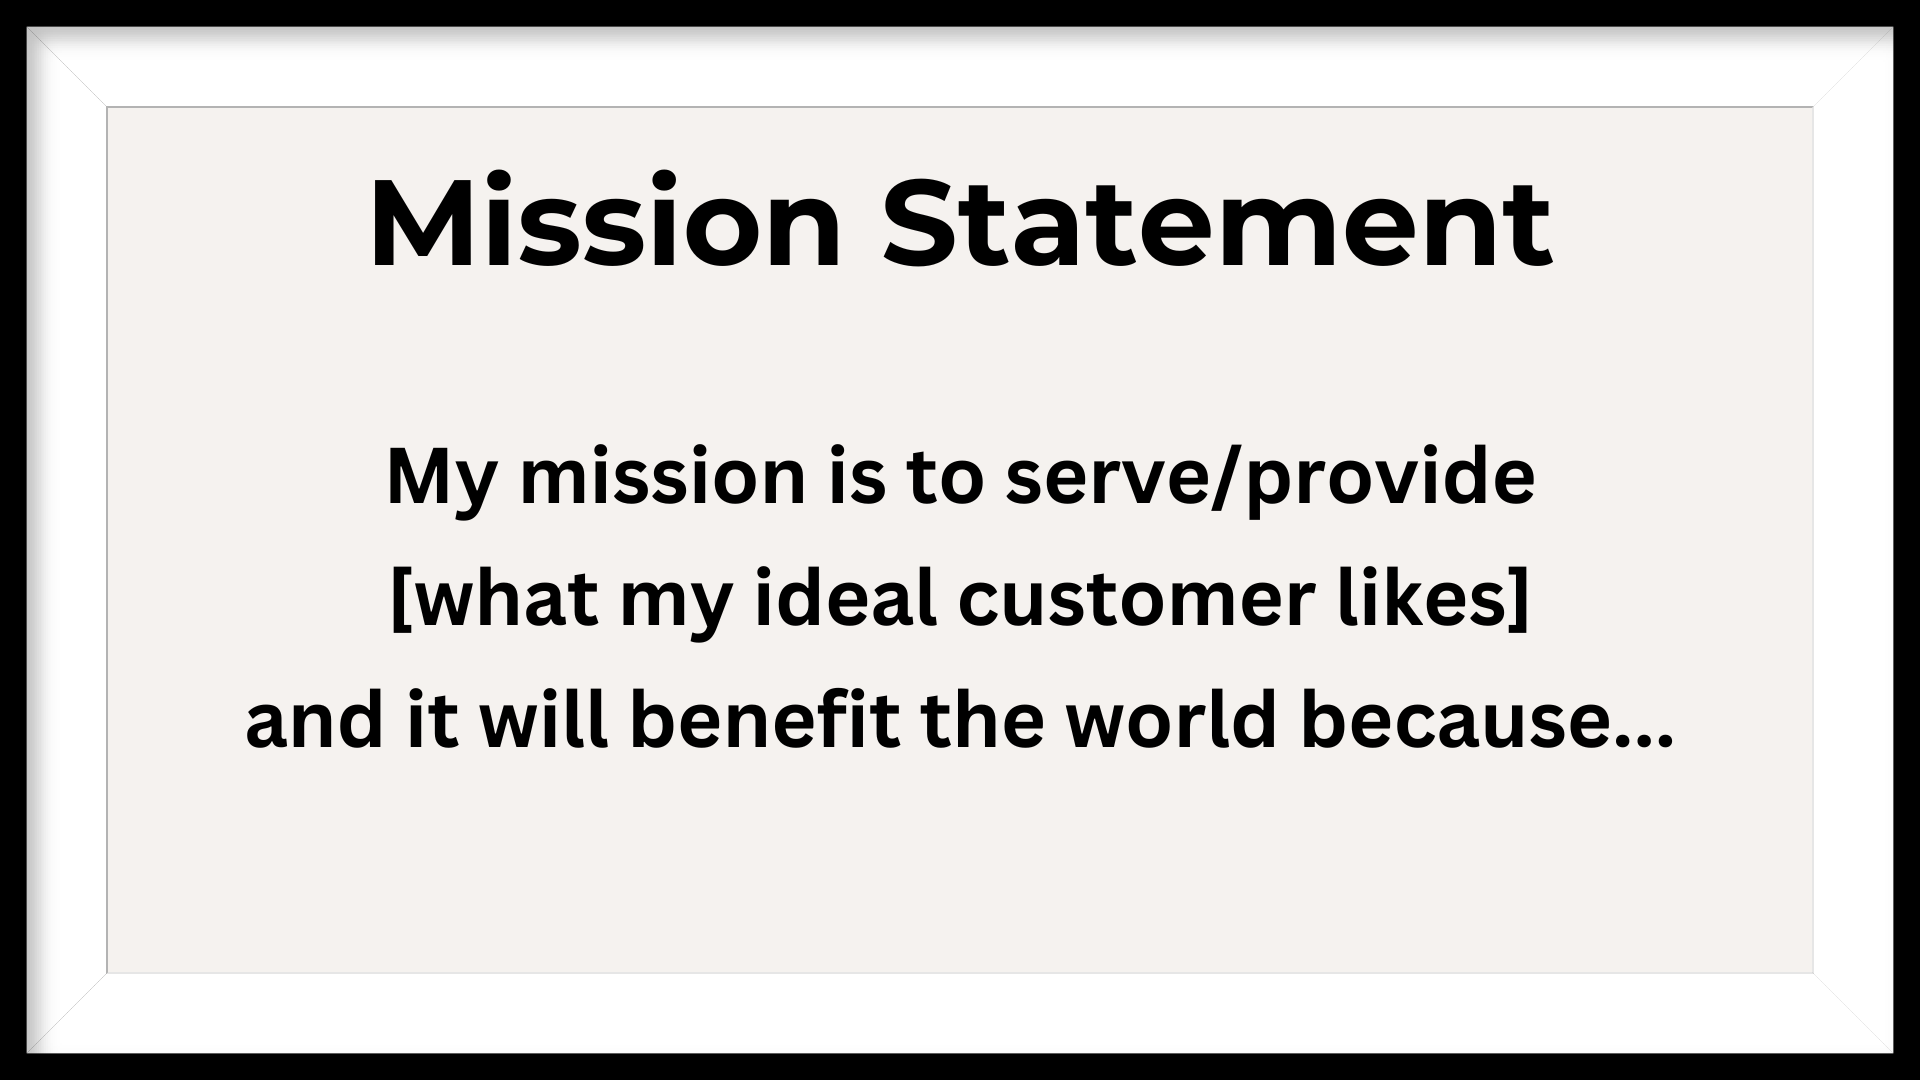 A mission statement that says my mission is to serve/provide what my ideal customer likes and it will benefit the world because...